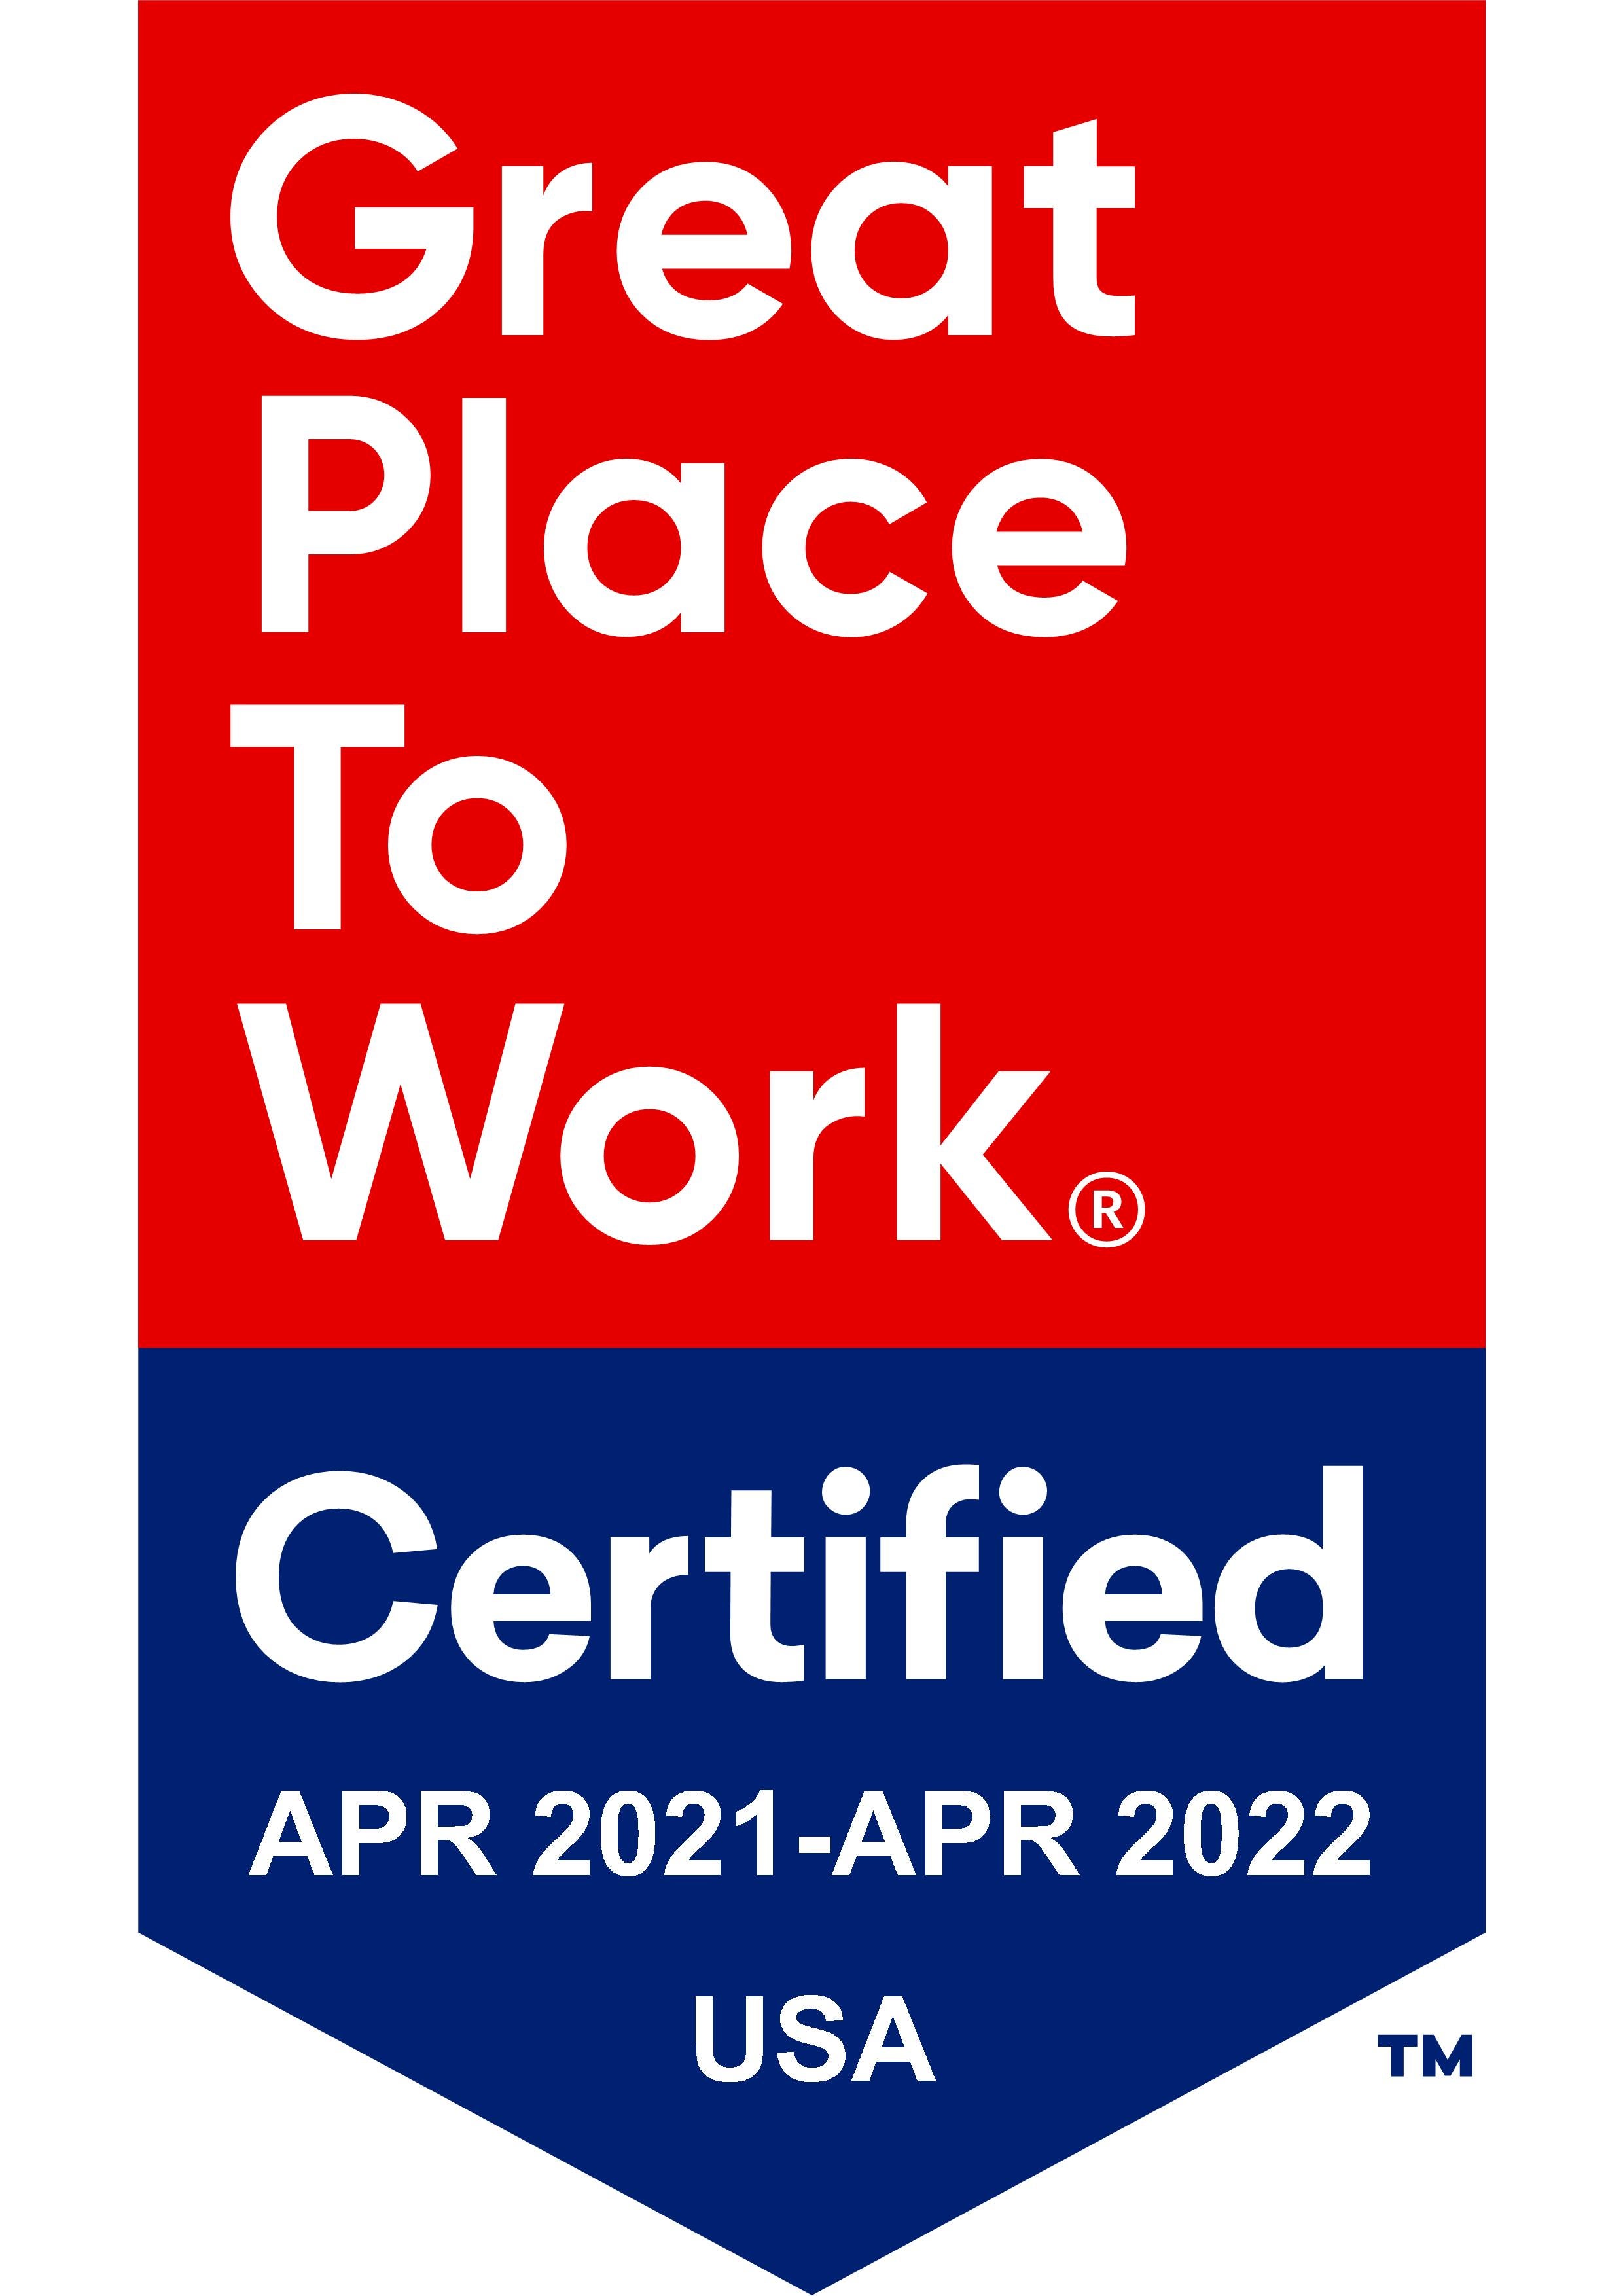 Great Place to Work Certified 2021-2022 USA